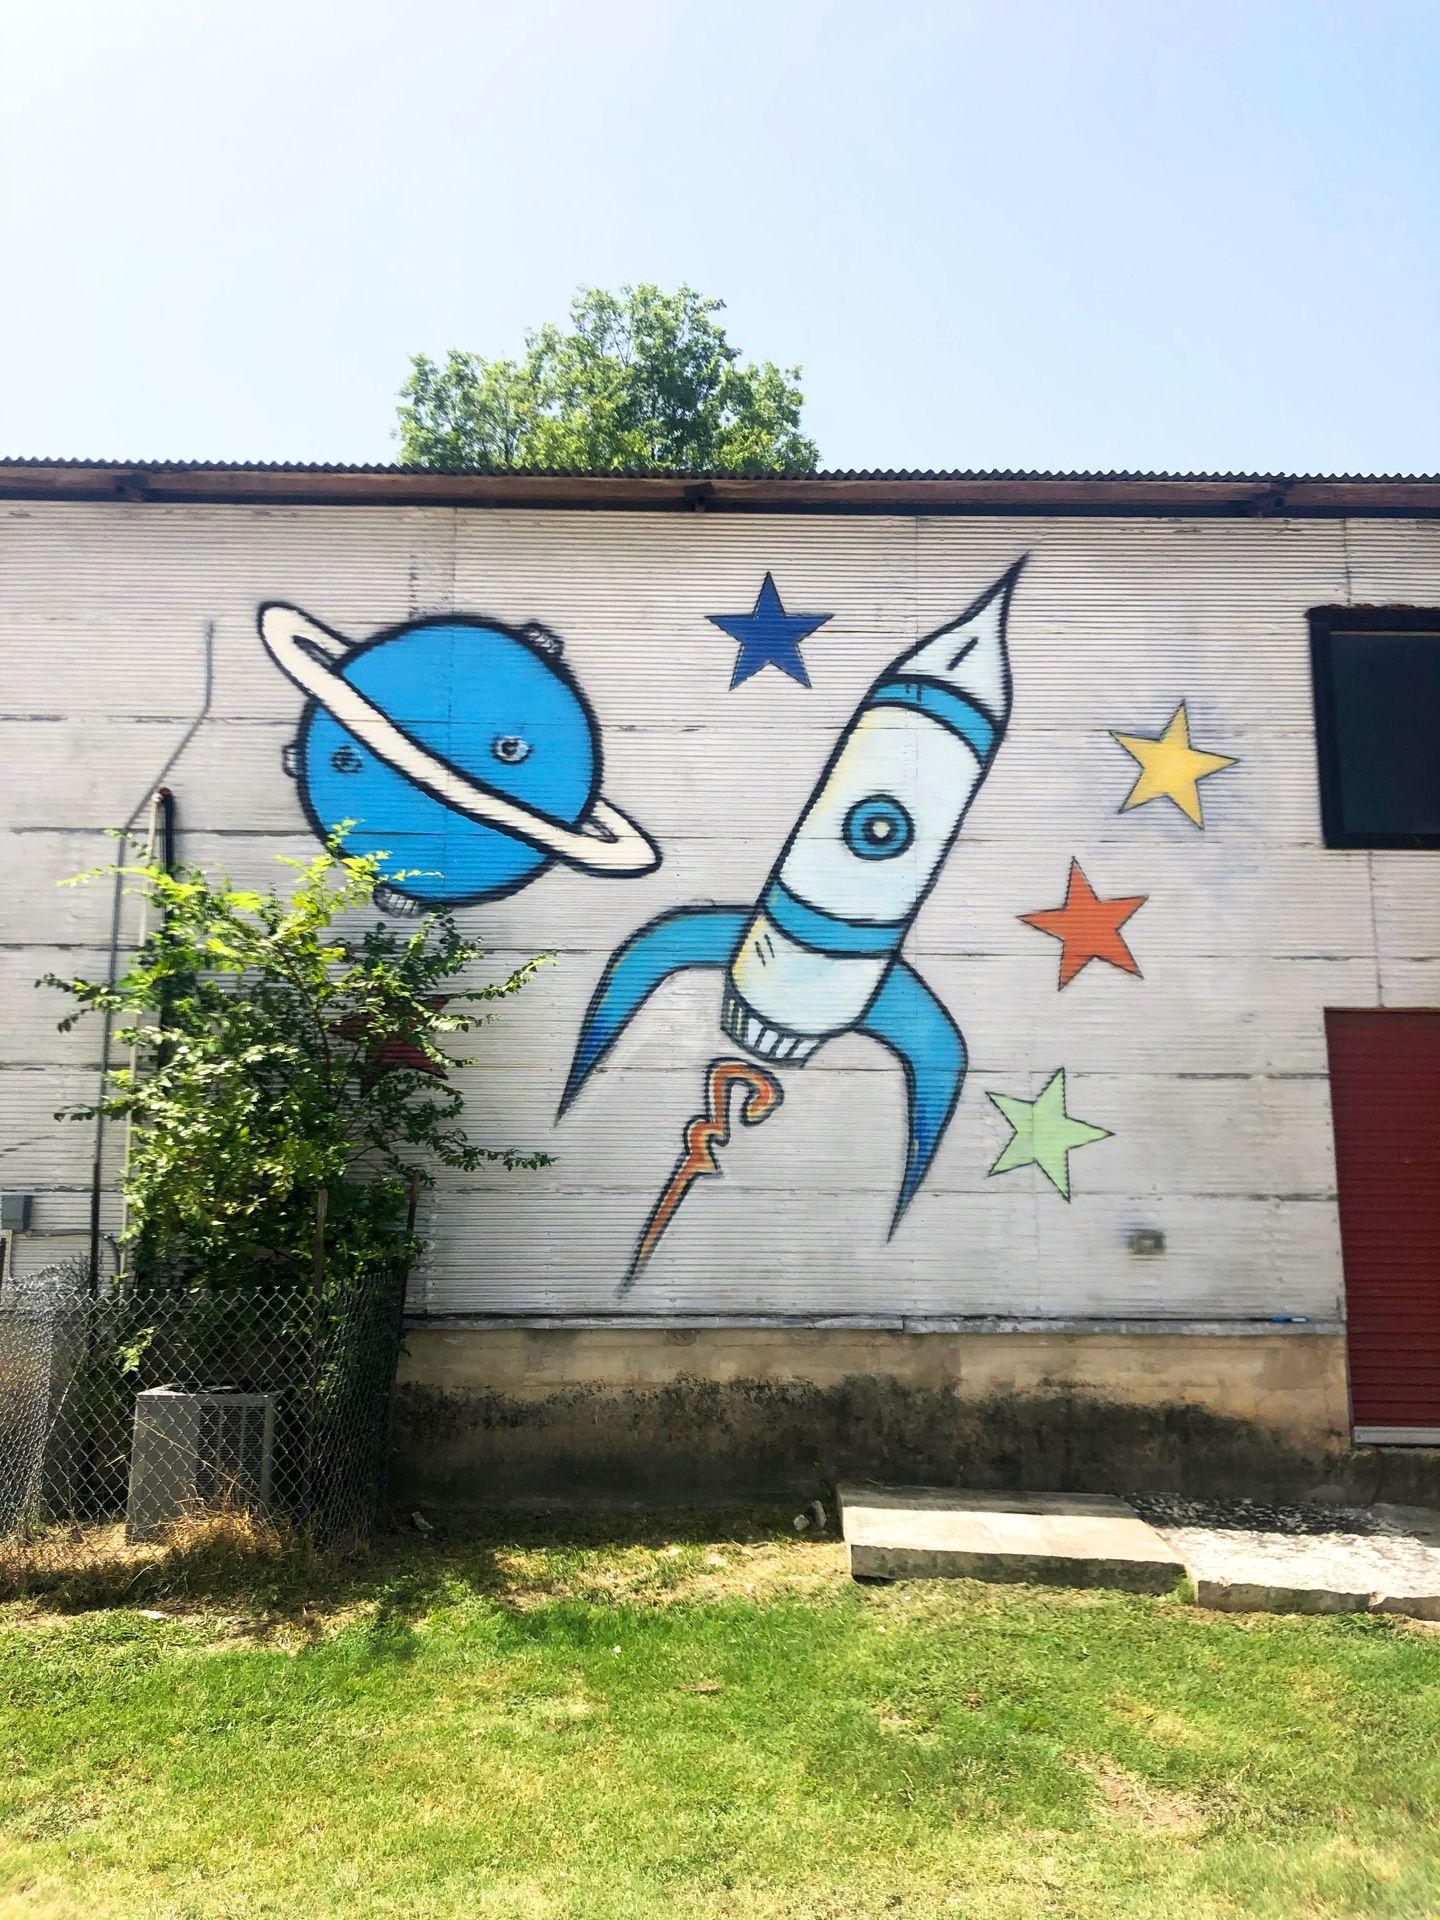 A mural of a rocket ship, a planet and stars.